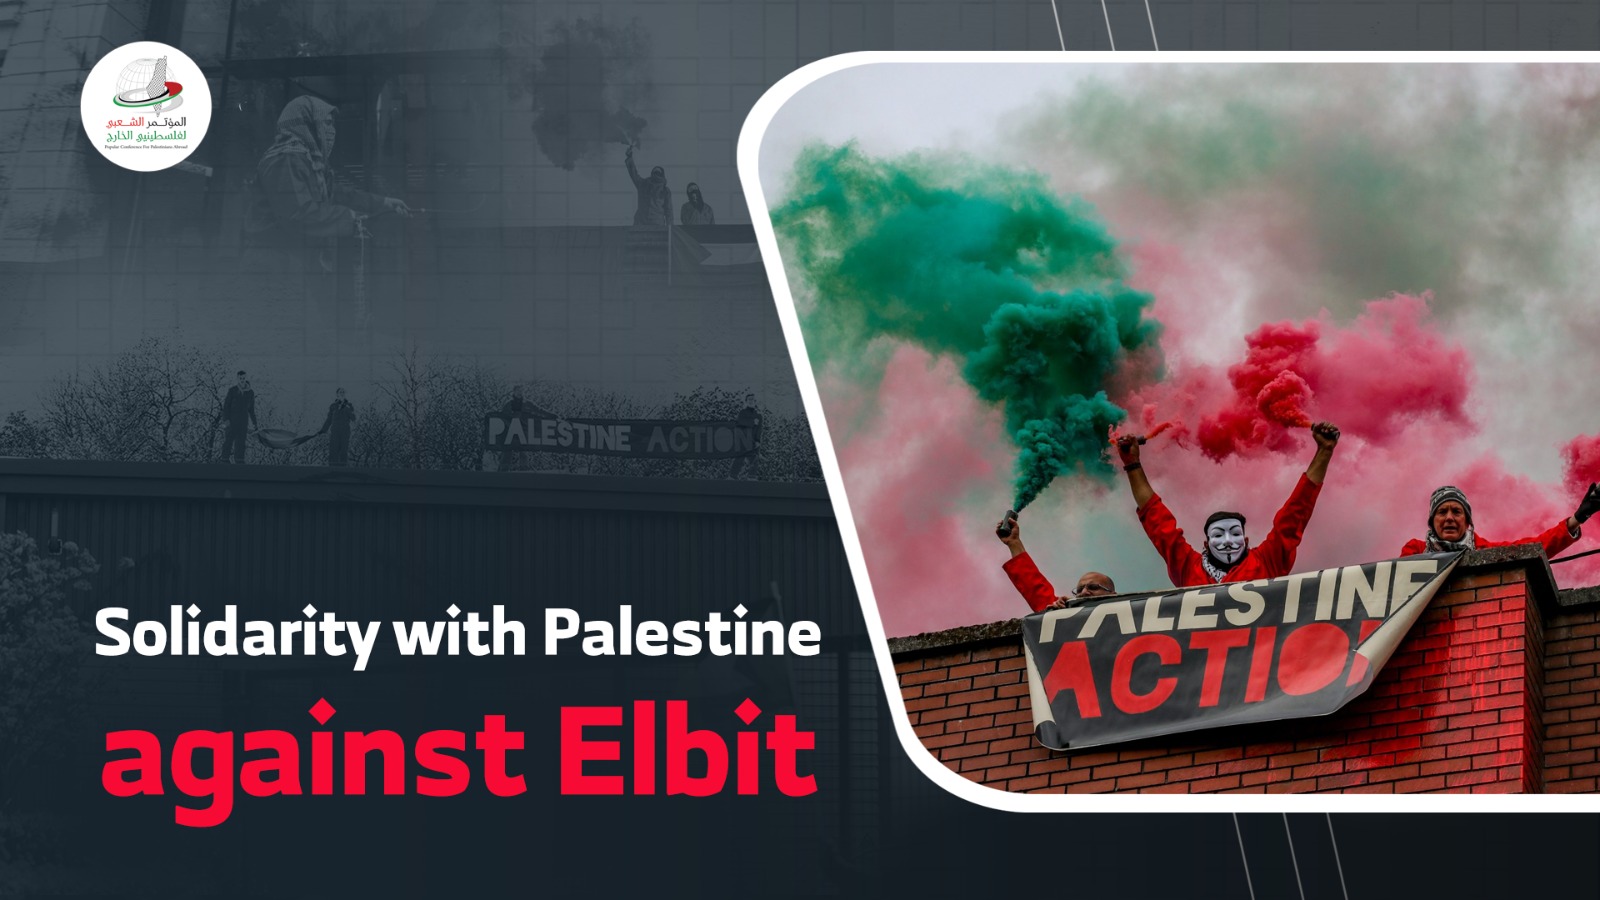 Solidarity with Palestine against Elbit